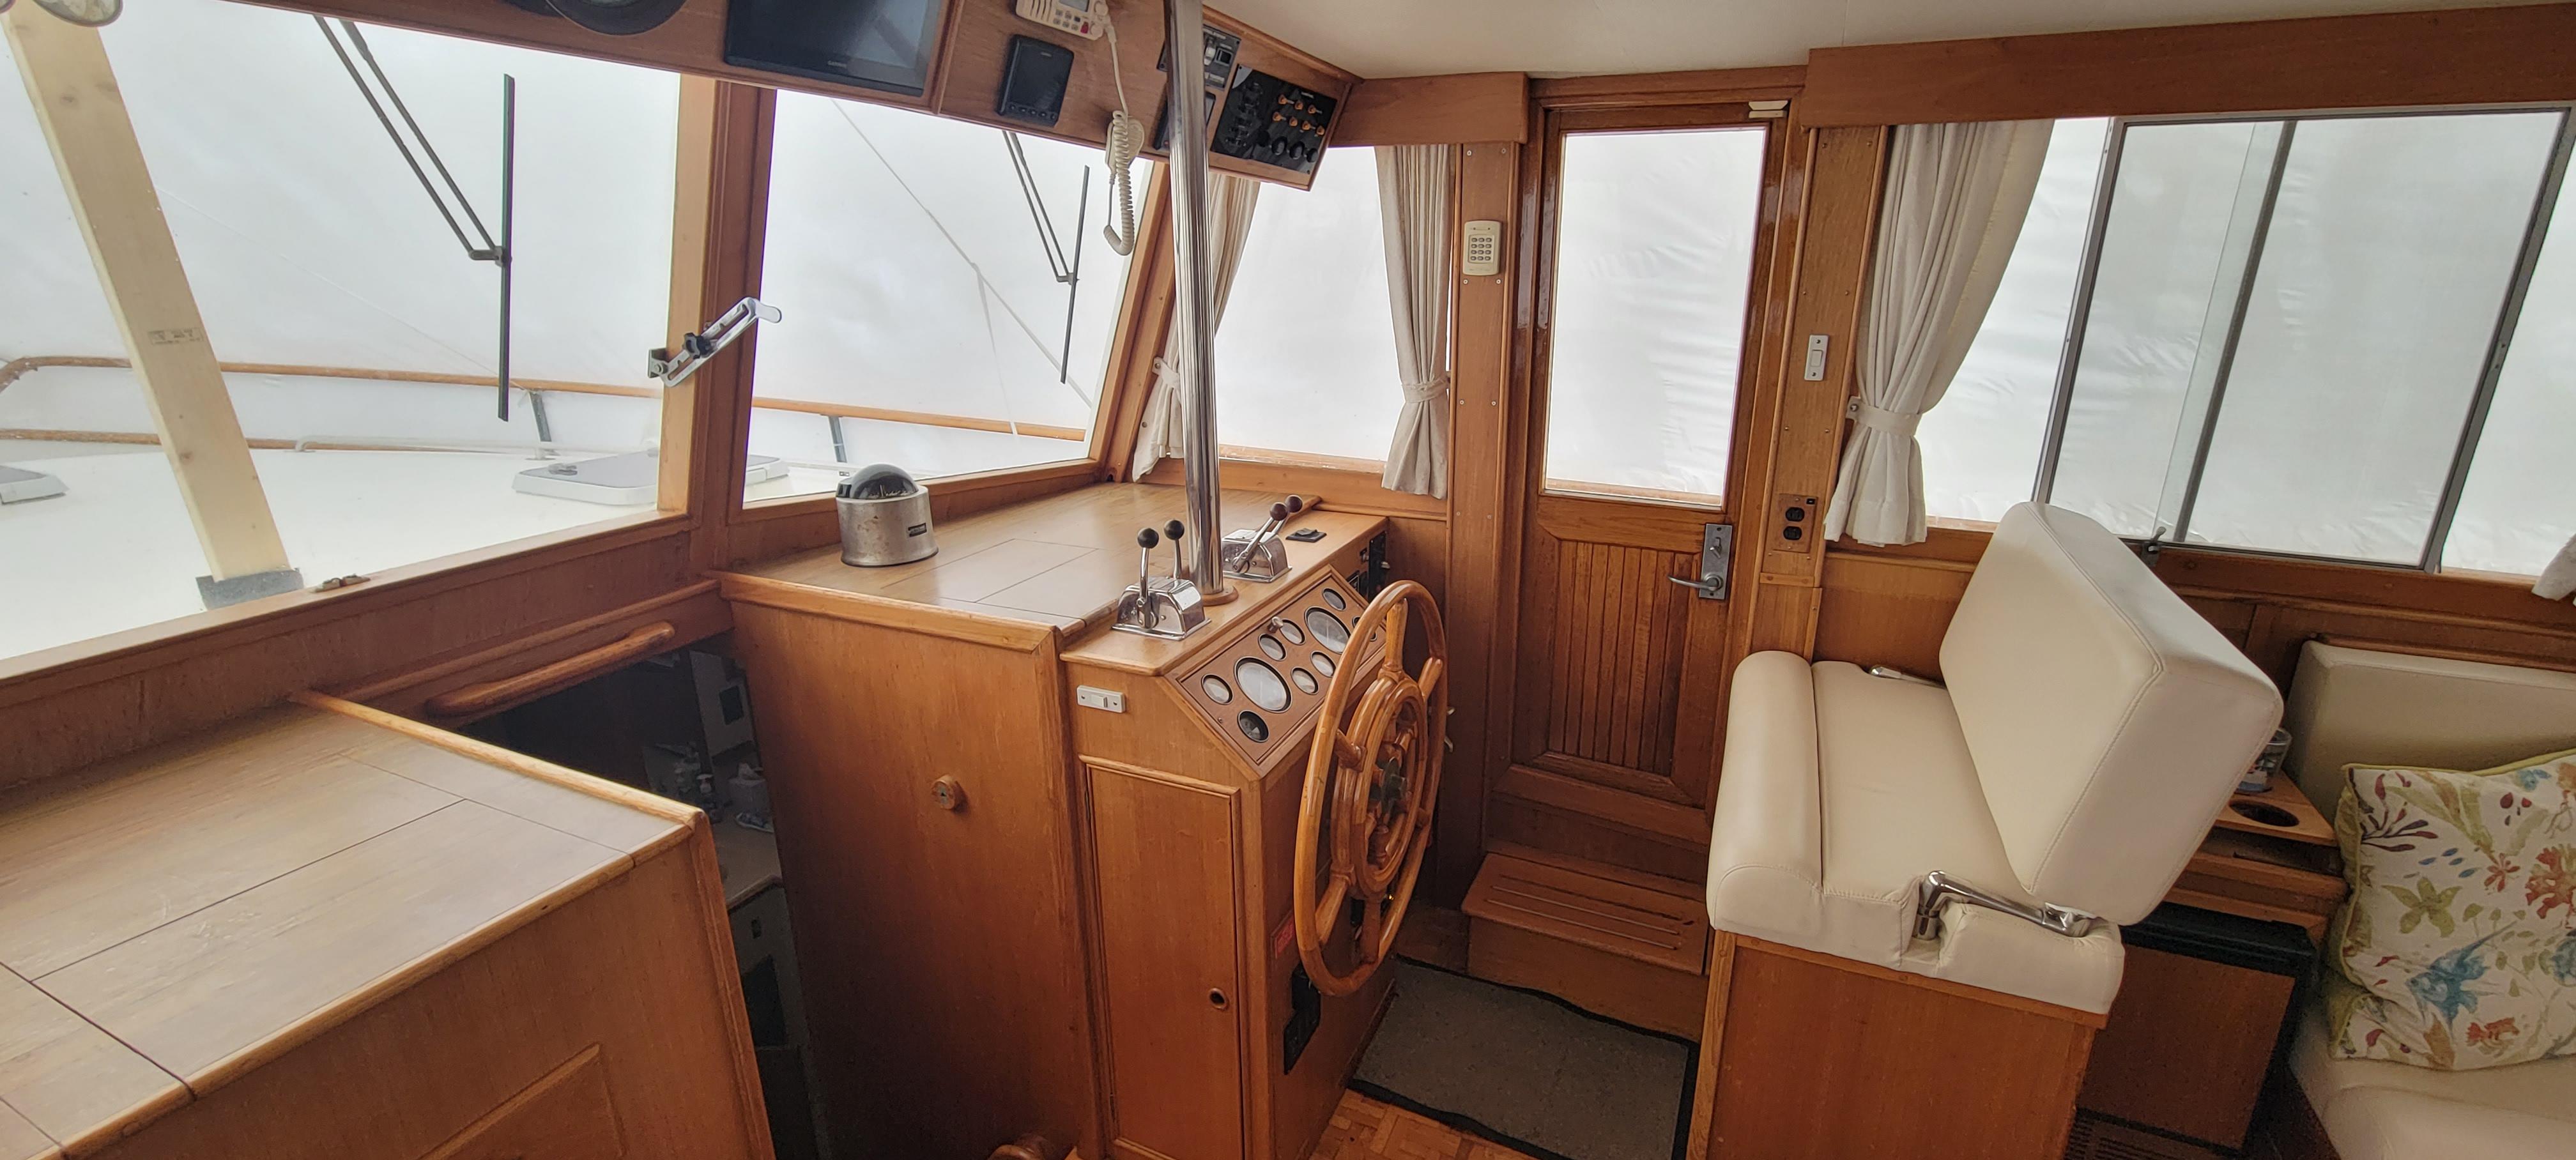 1996 Grand Banks 46 Classic-3 Cabin-stabilized